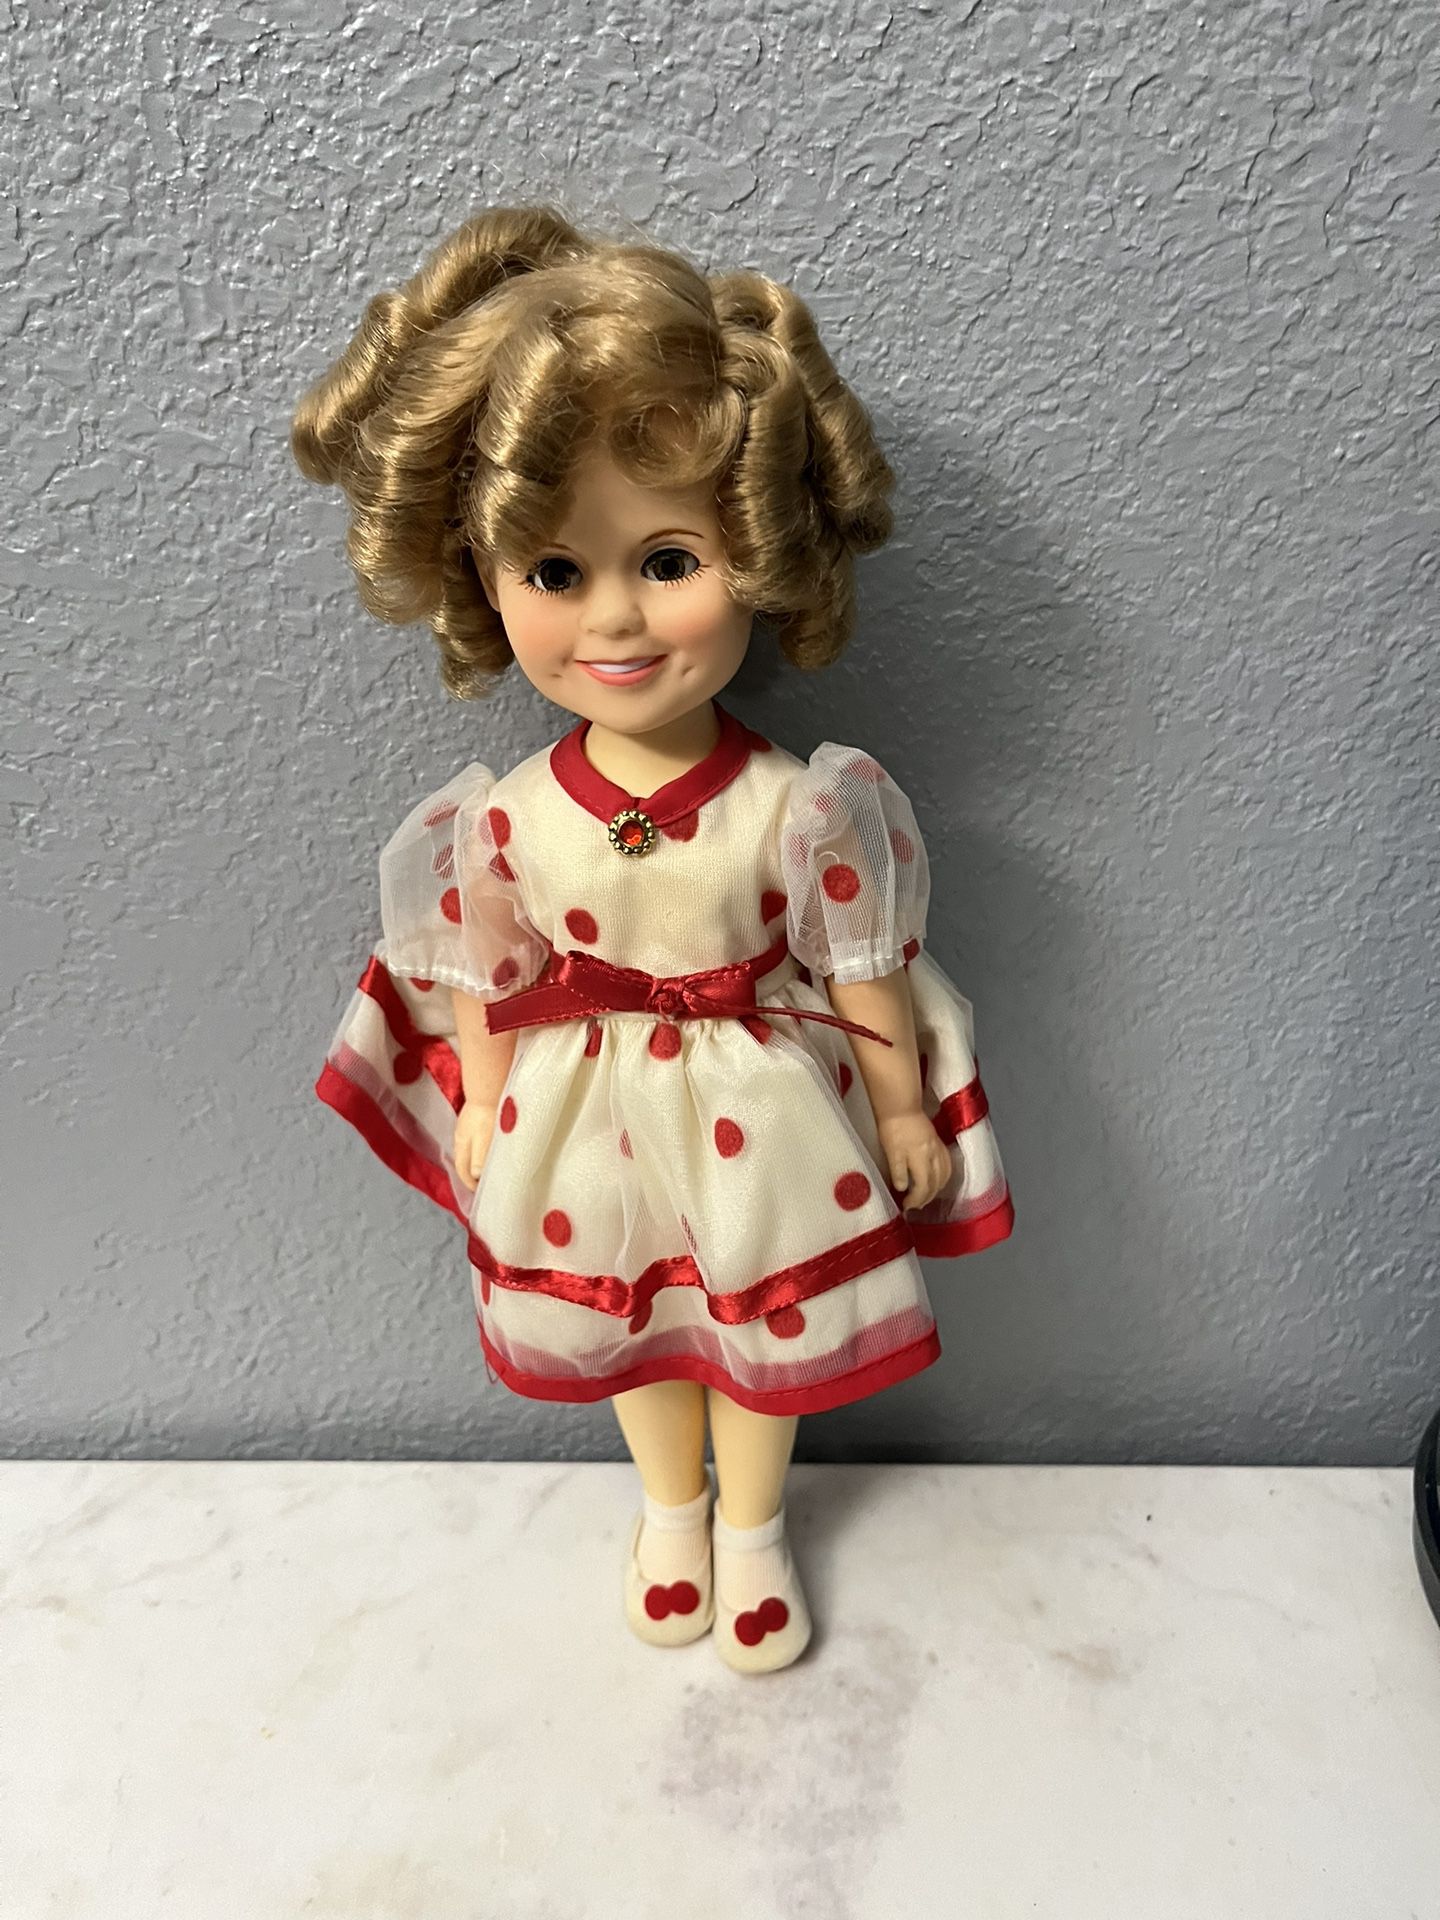 Vintage 1982 Shirley Temple Doll.  Brand IDEAL.  Size 11 1/2 Inches Tall.  Preowned Has Been On Display 